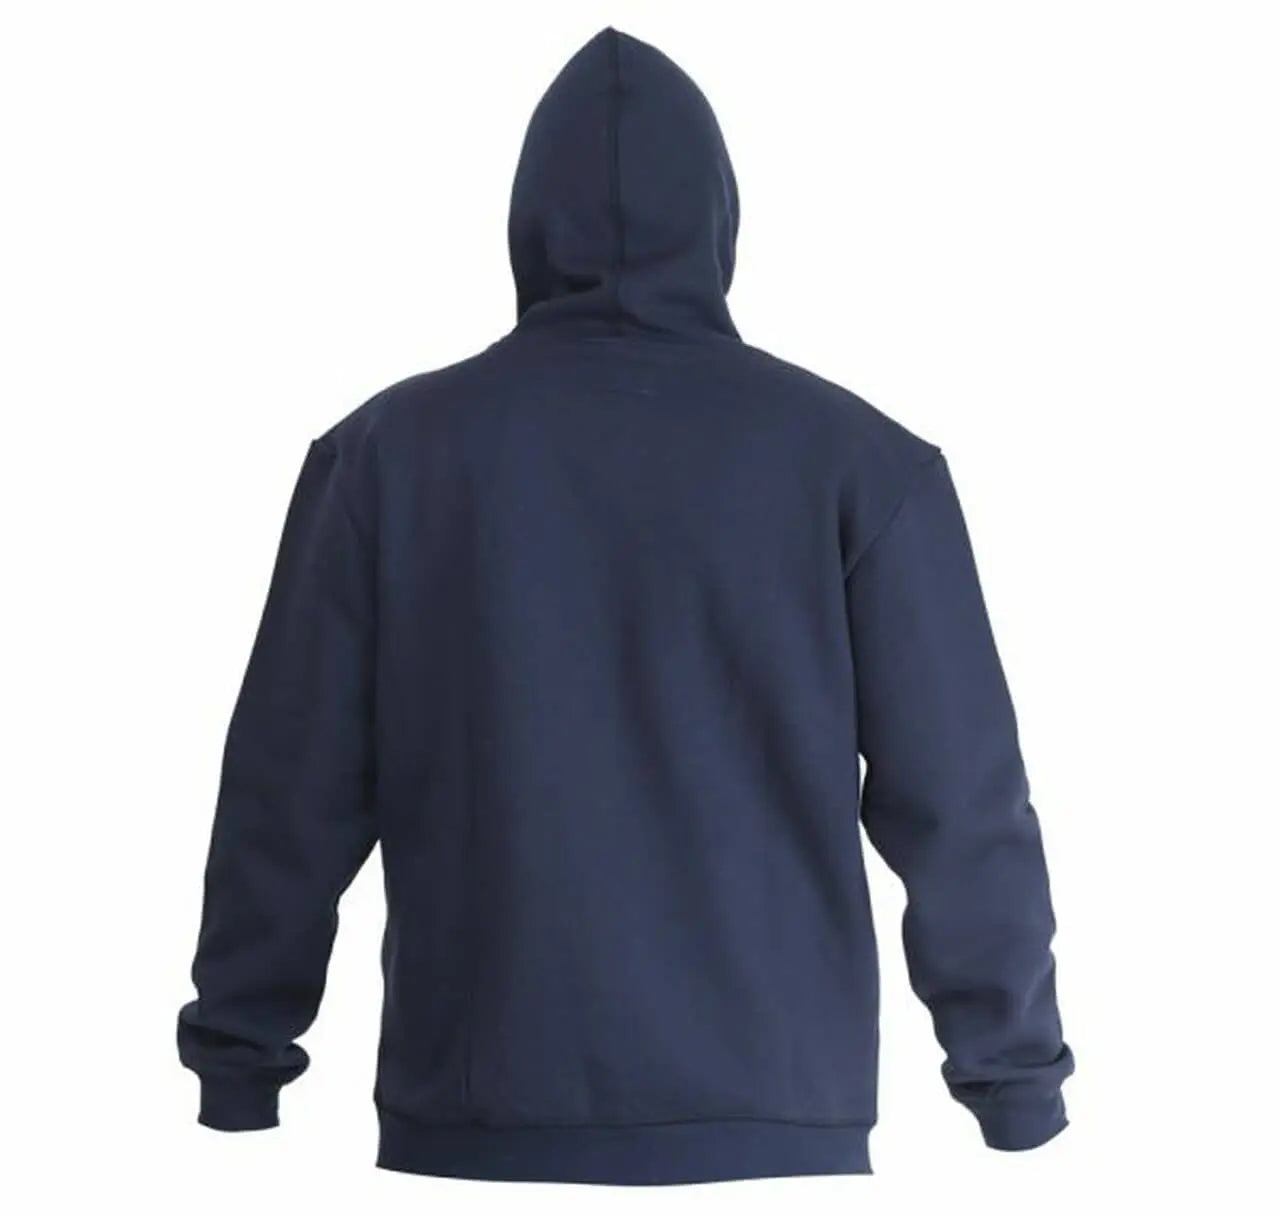 FORGE - Men's FR Hoodie with Zipper, Navy - Becker Safety and Supply